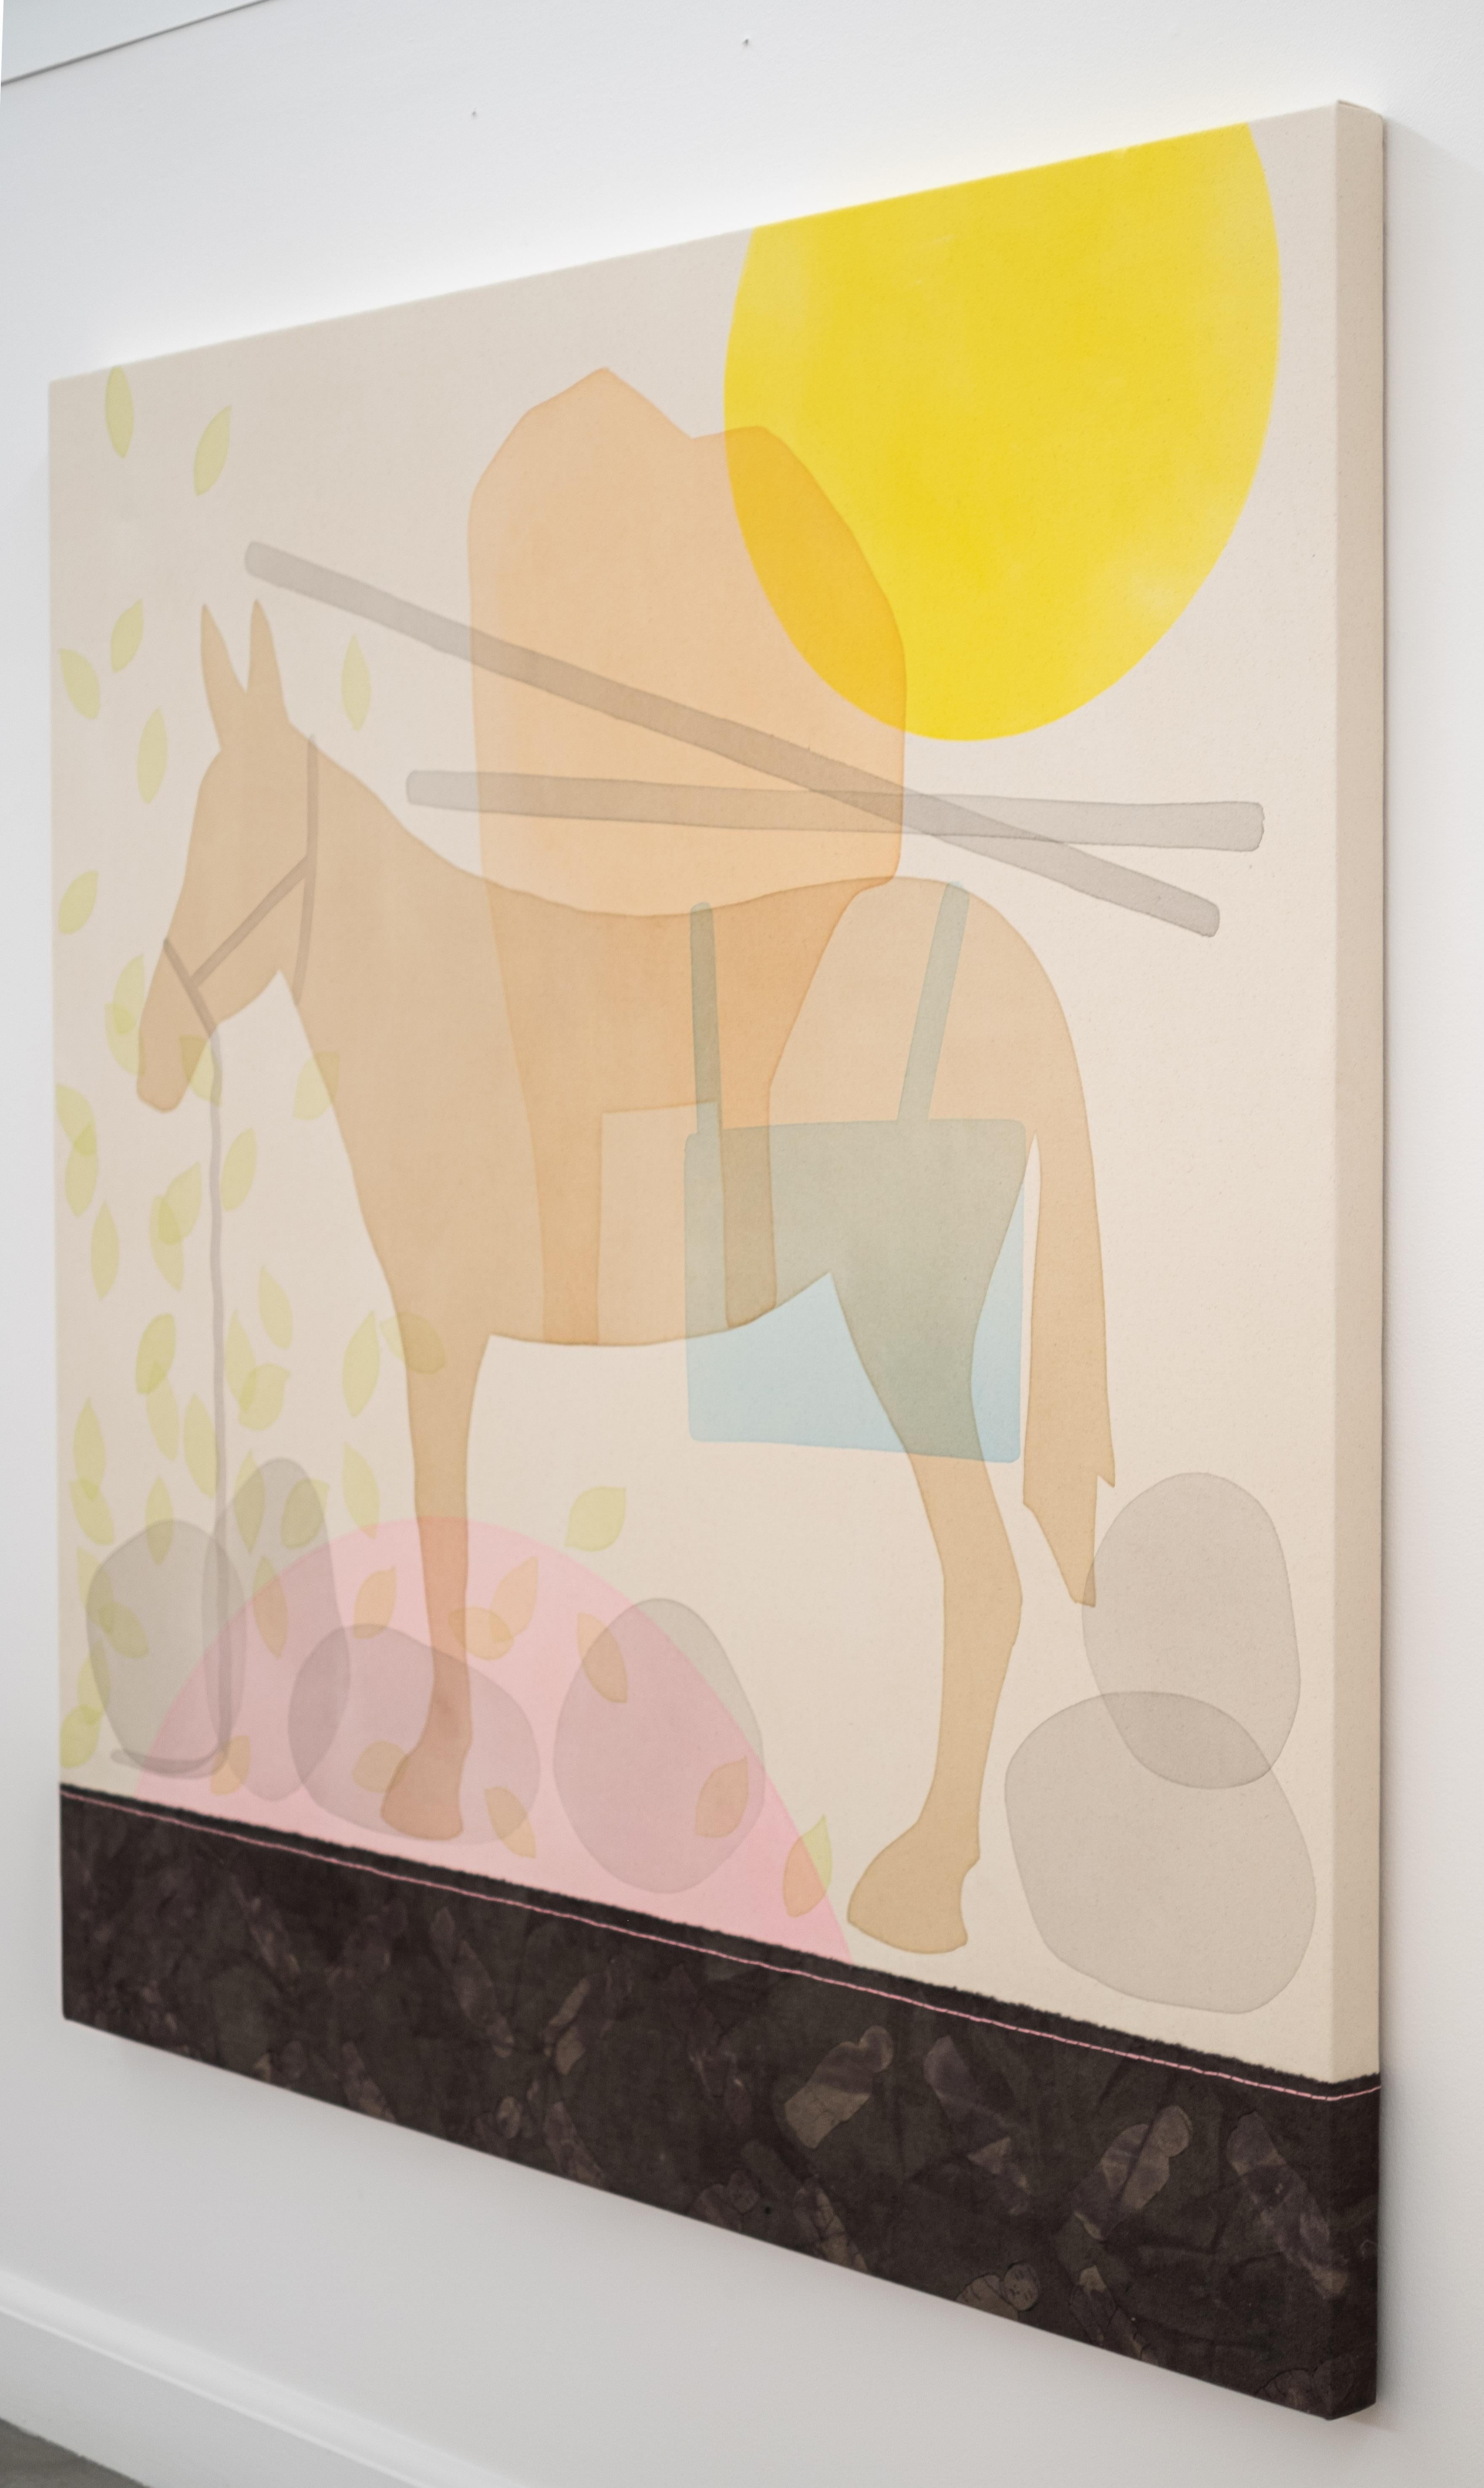 Aron Hill has always taken fresh and distinctive approaches to their contemporary artwork. This new series recalls the same strong, simple form—the sun and rocks appear as familiar images but it is the profile of a pack mule that fills the